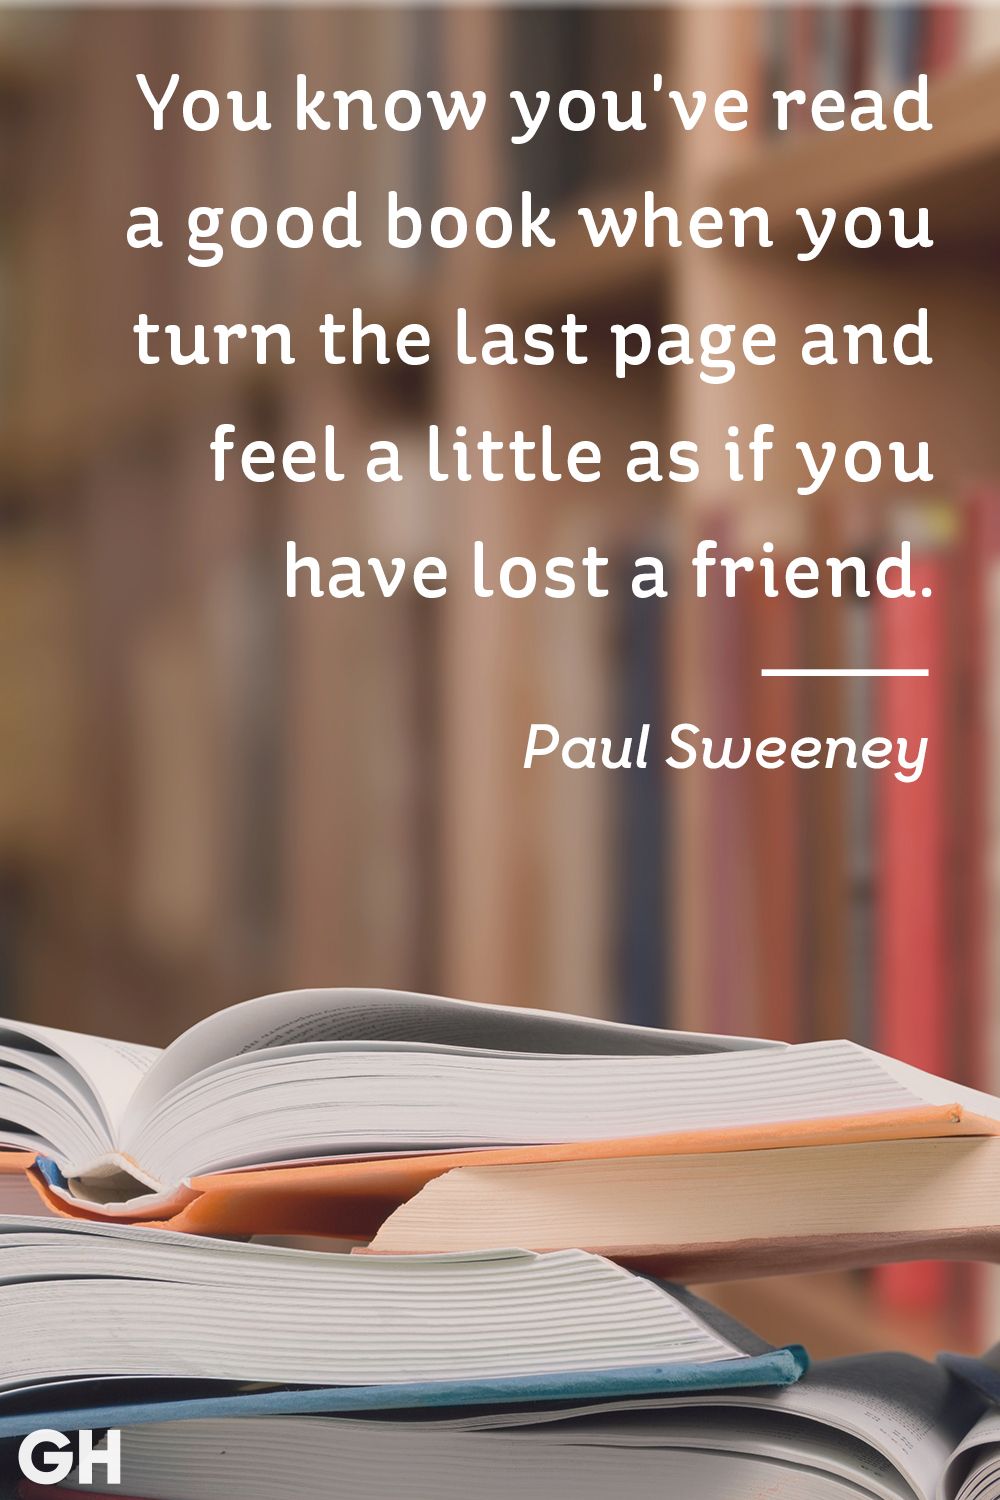 you know you’ve read a good book when you turn the last page and feel a little as if you have lost a friend. paul sweeney